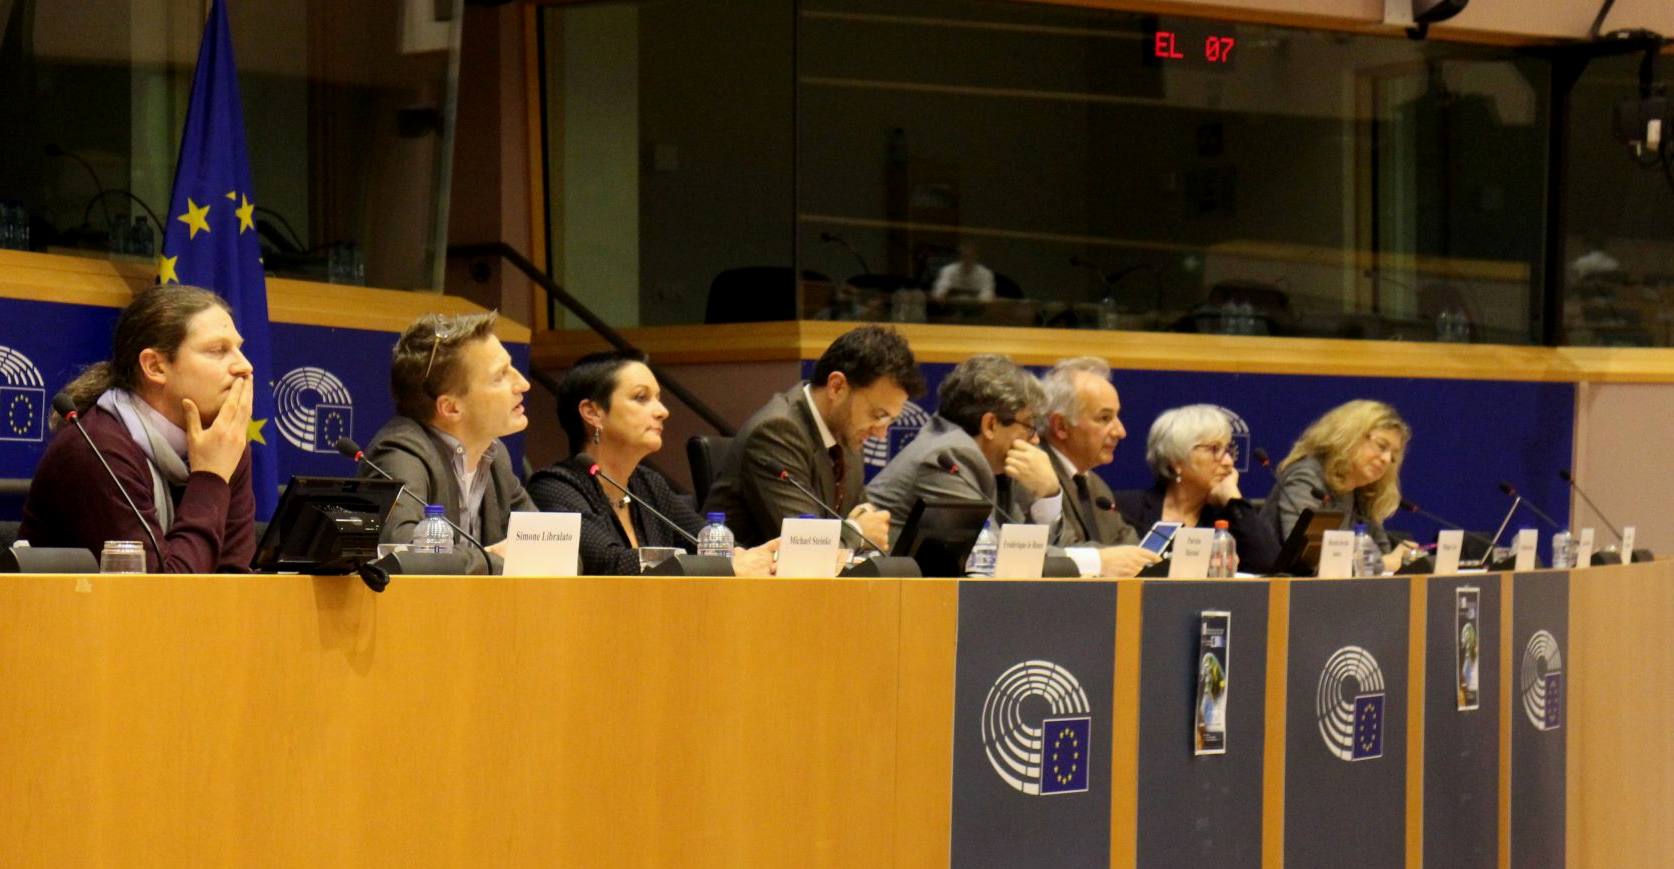 Euromarine members at the conference in February 2017